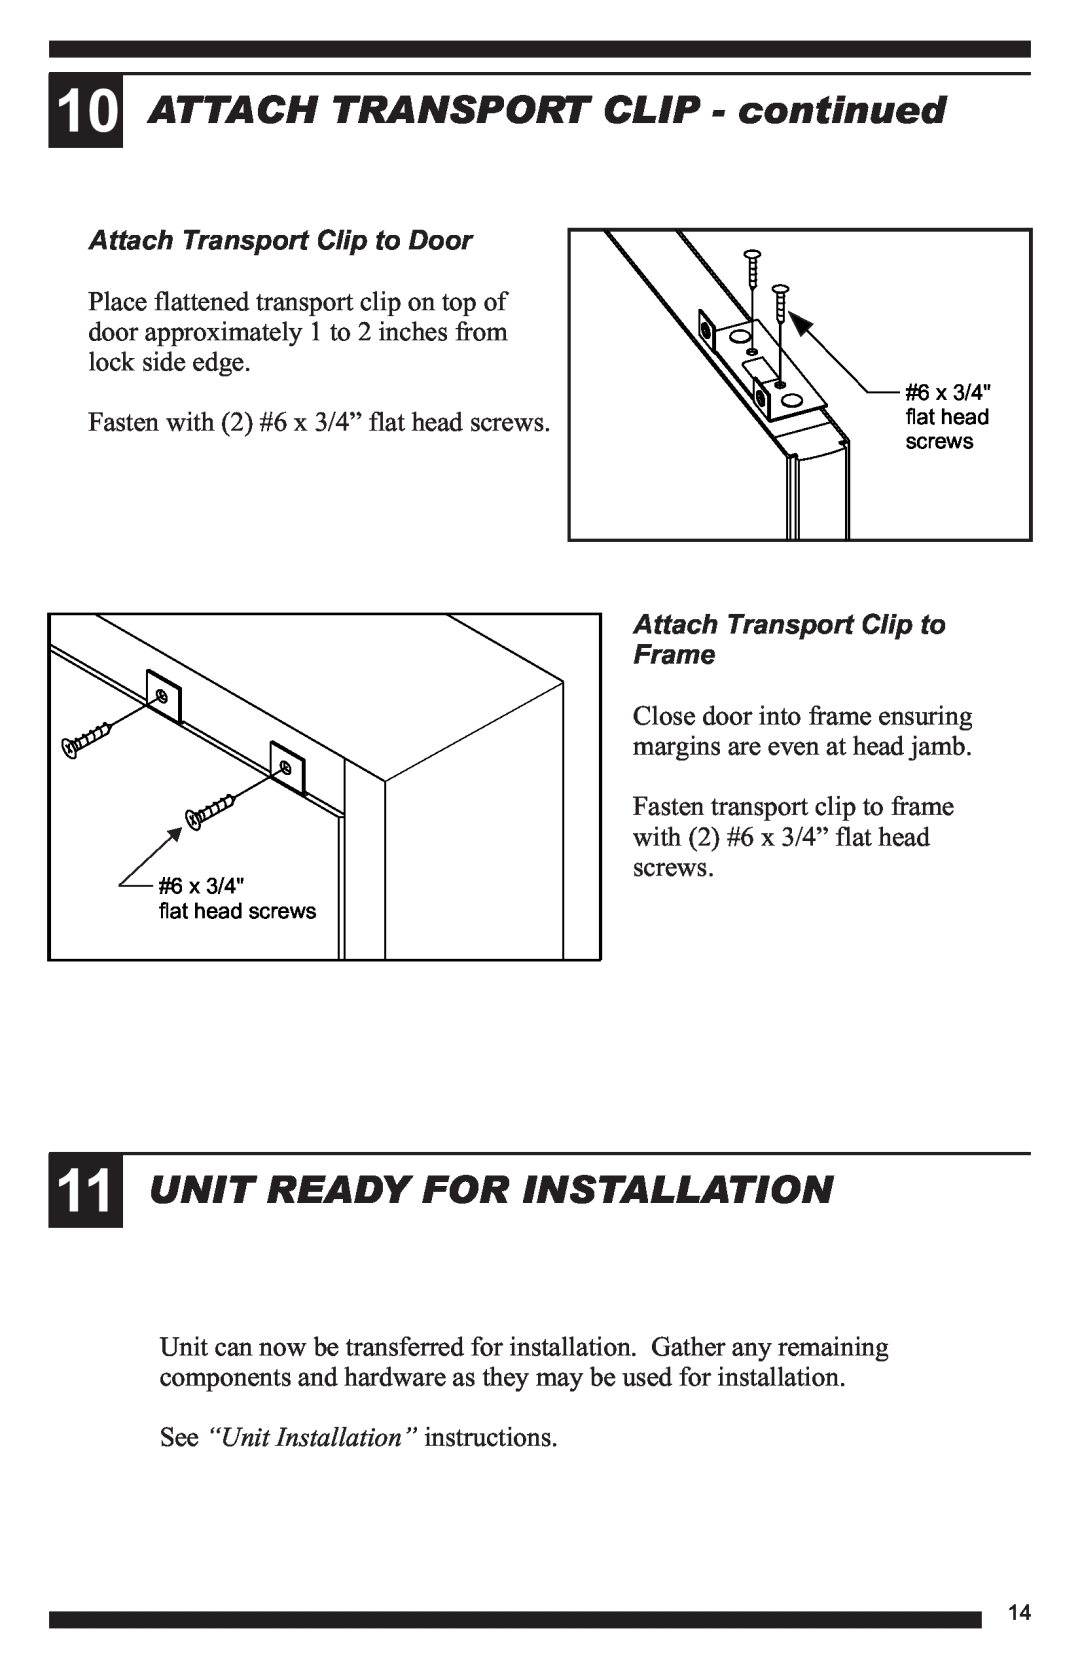 Therma-Tru Hinged Patio Door System Single Panel Assembly Unit manual ATTACH TRANSPORT CLIP - continued 